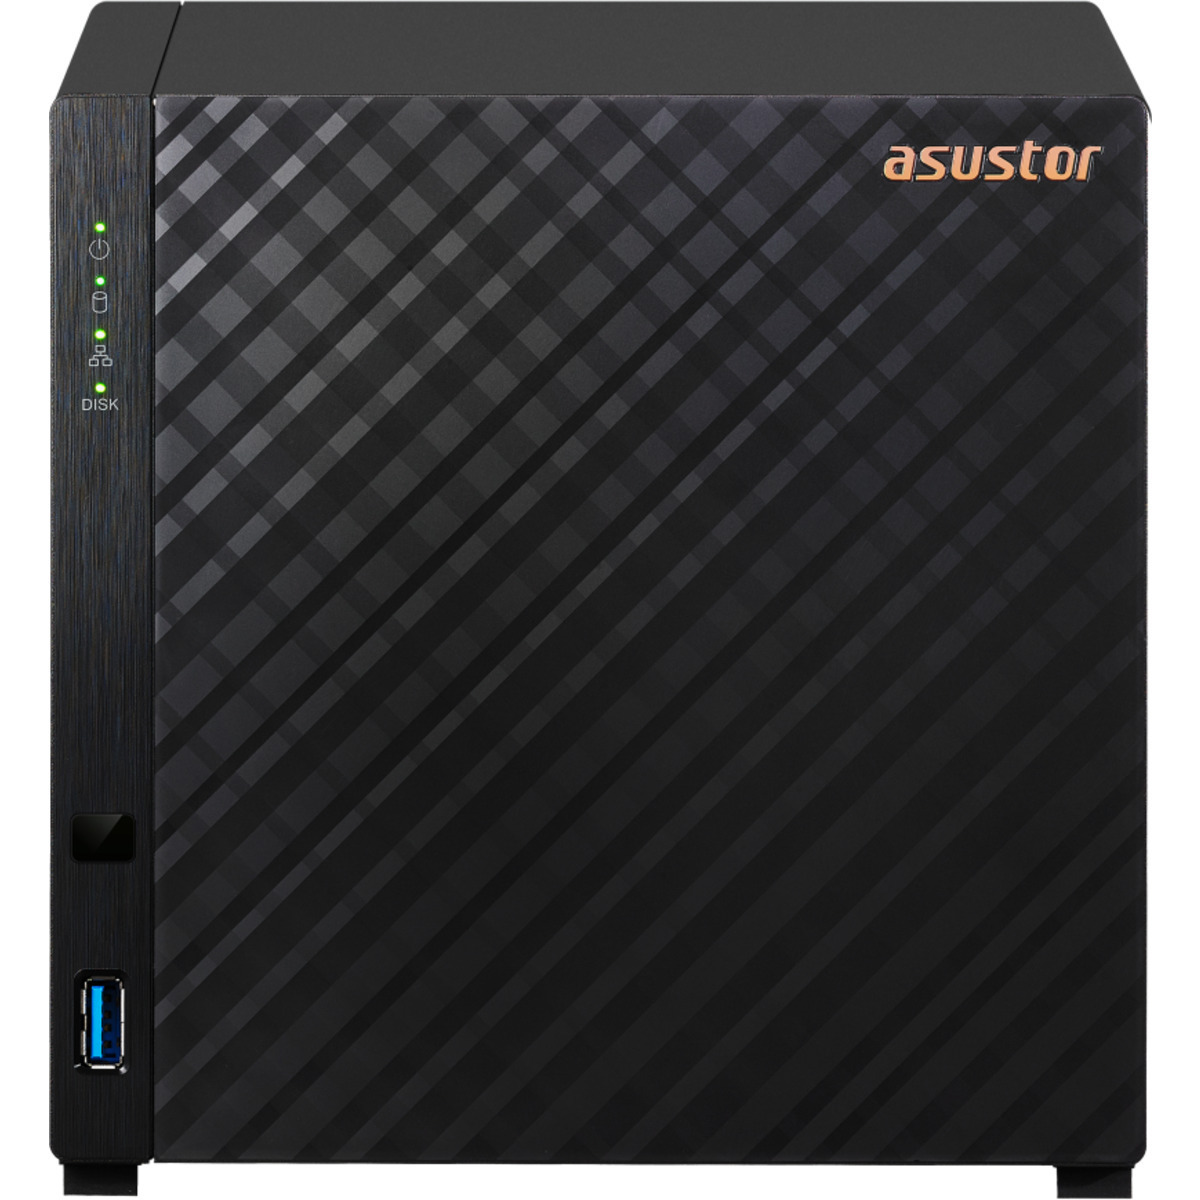 ASUSTOR DRIVESTOR 4 AS1104T 36tb 4-Bay Desktop Personal / Basic Home / Small Office NAS - Network Attached Storage Device 3x12tb Western Digital Ultrastar DC HC520 HUH721212ALE600 3.5 7200rpm SATA 6Gb/s HDD ENTERPRISE Class Drives Installed - Burn-In Tested DRIVESTOR 4 AS1104T